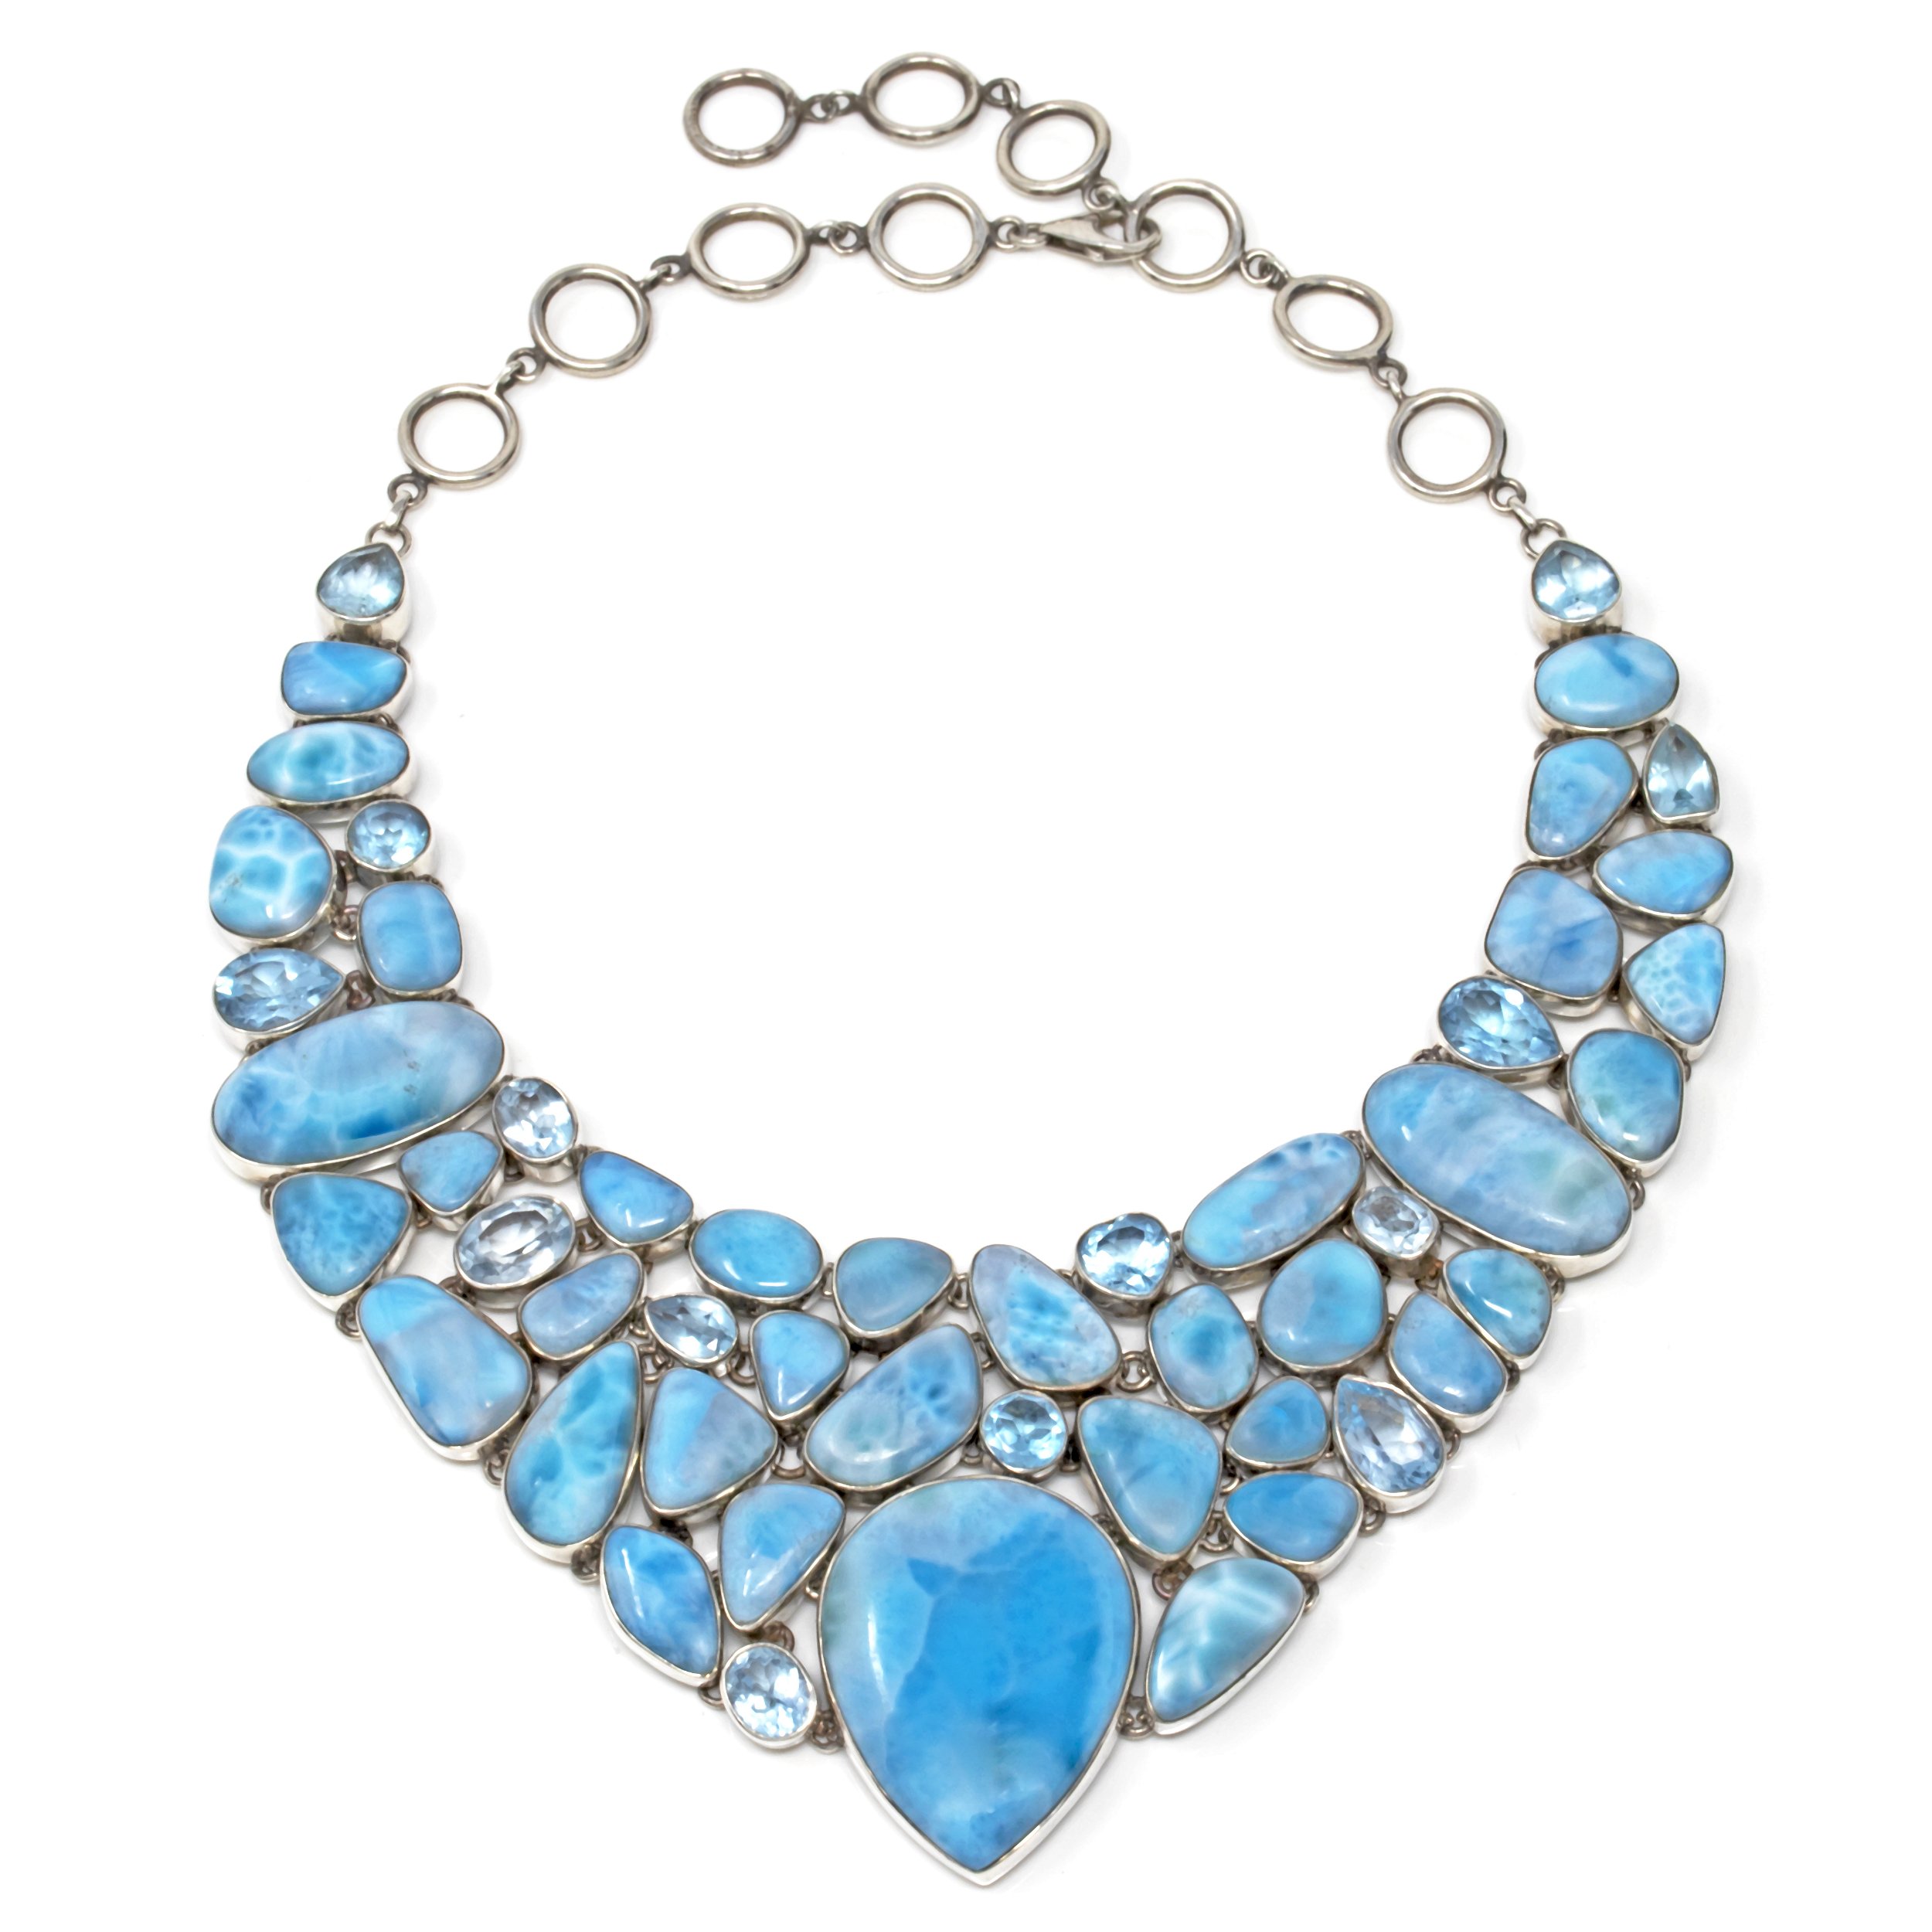 Larimar Necklace -Pear Center Stone With Blue Topaz Accents On Fluid Cagework Collar